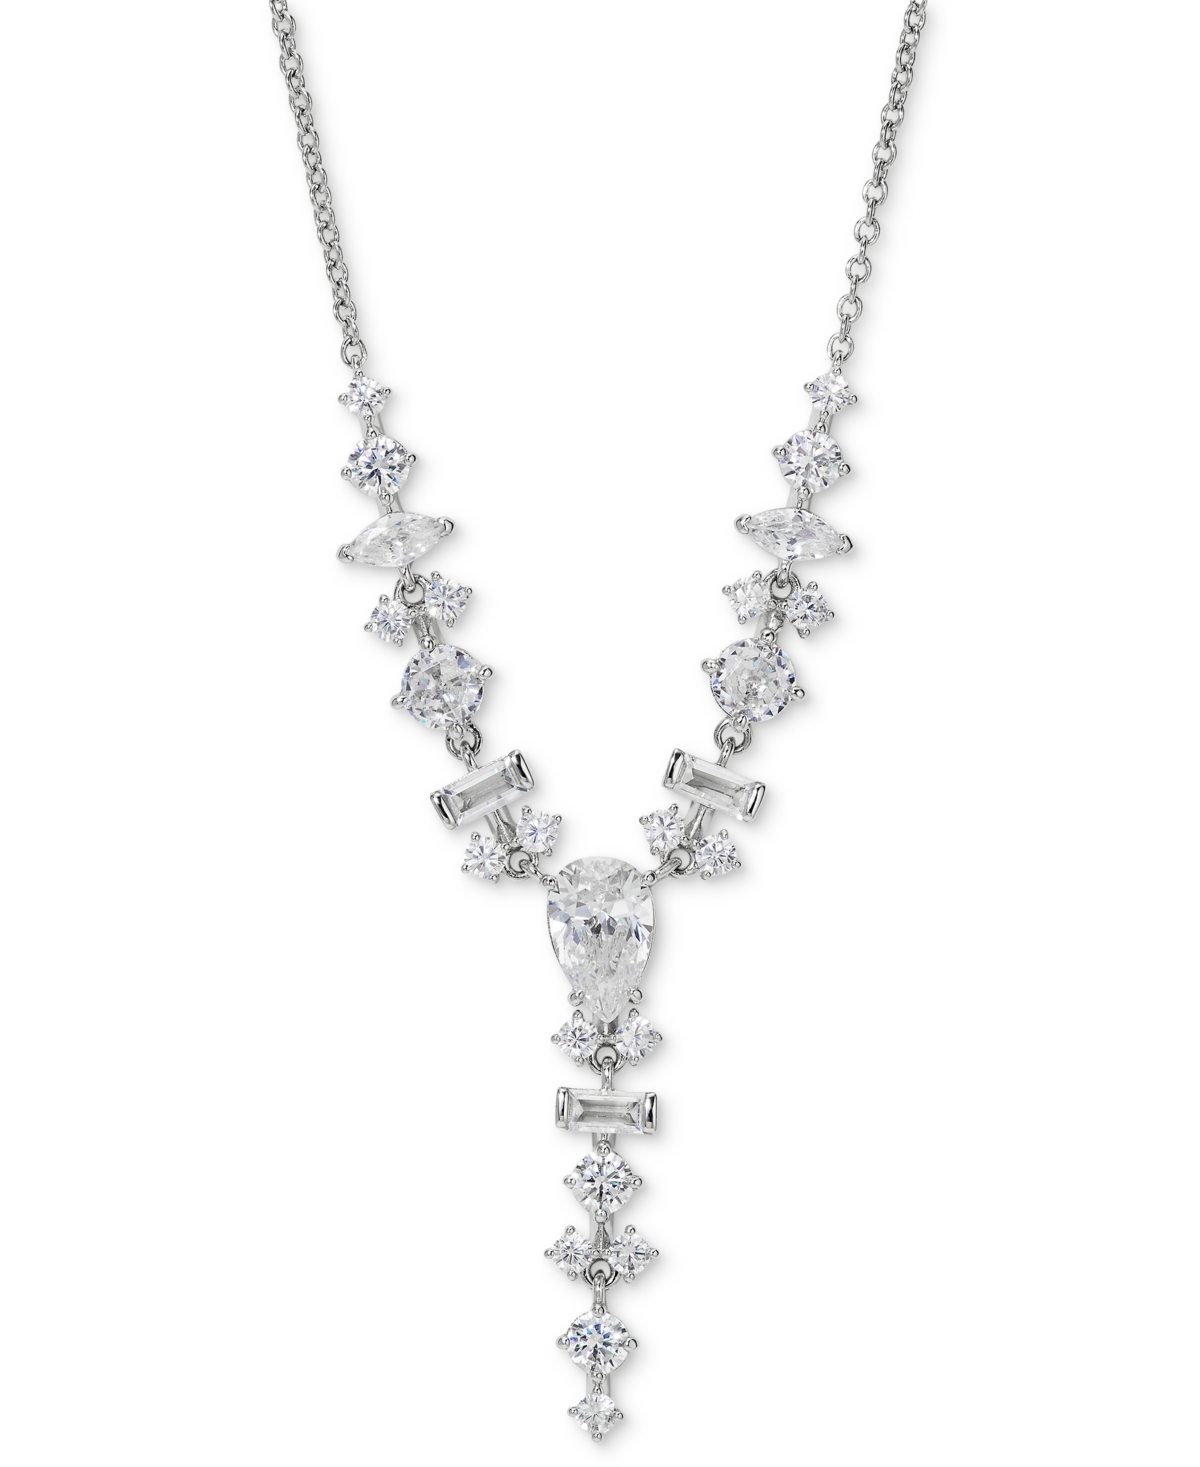 Silver-Tone Mixed Cubic Zirconia Cluster Lariat Necklace, 16" + 2" extender, Created for Macy's - Rhodium